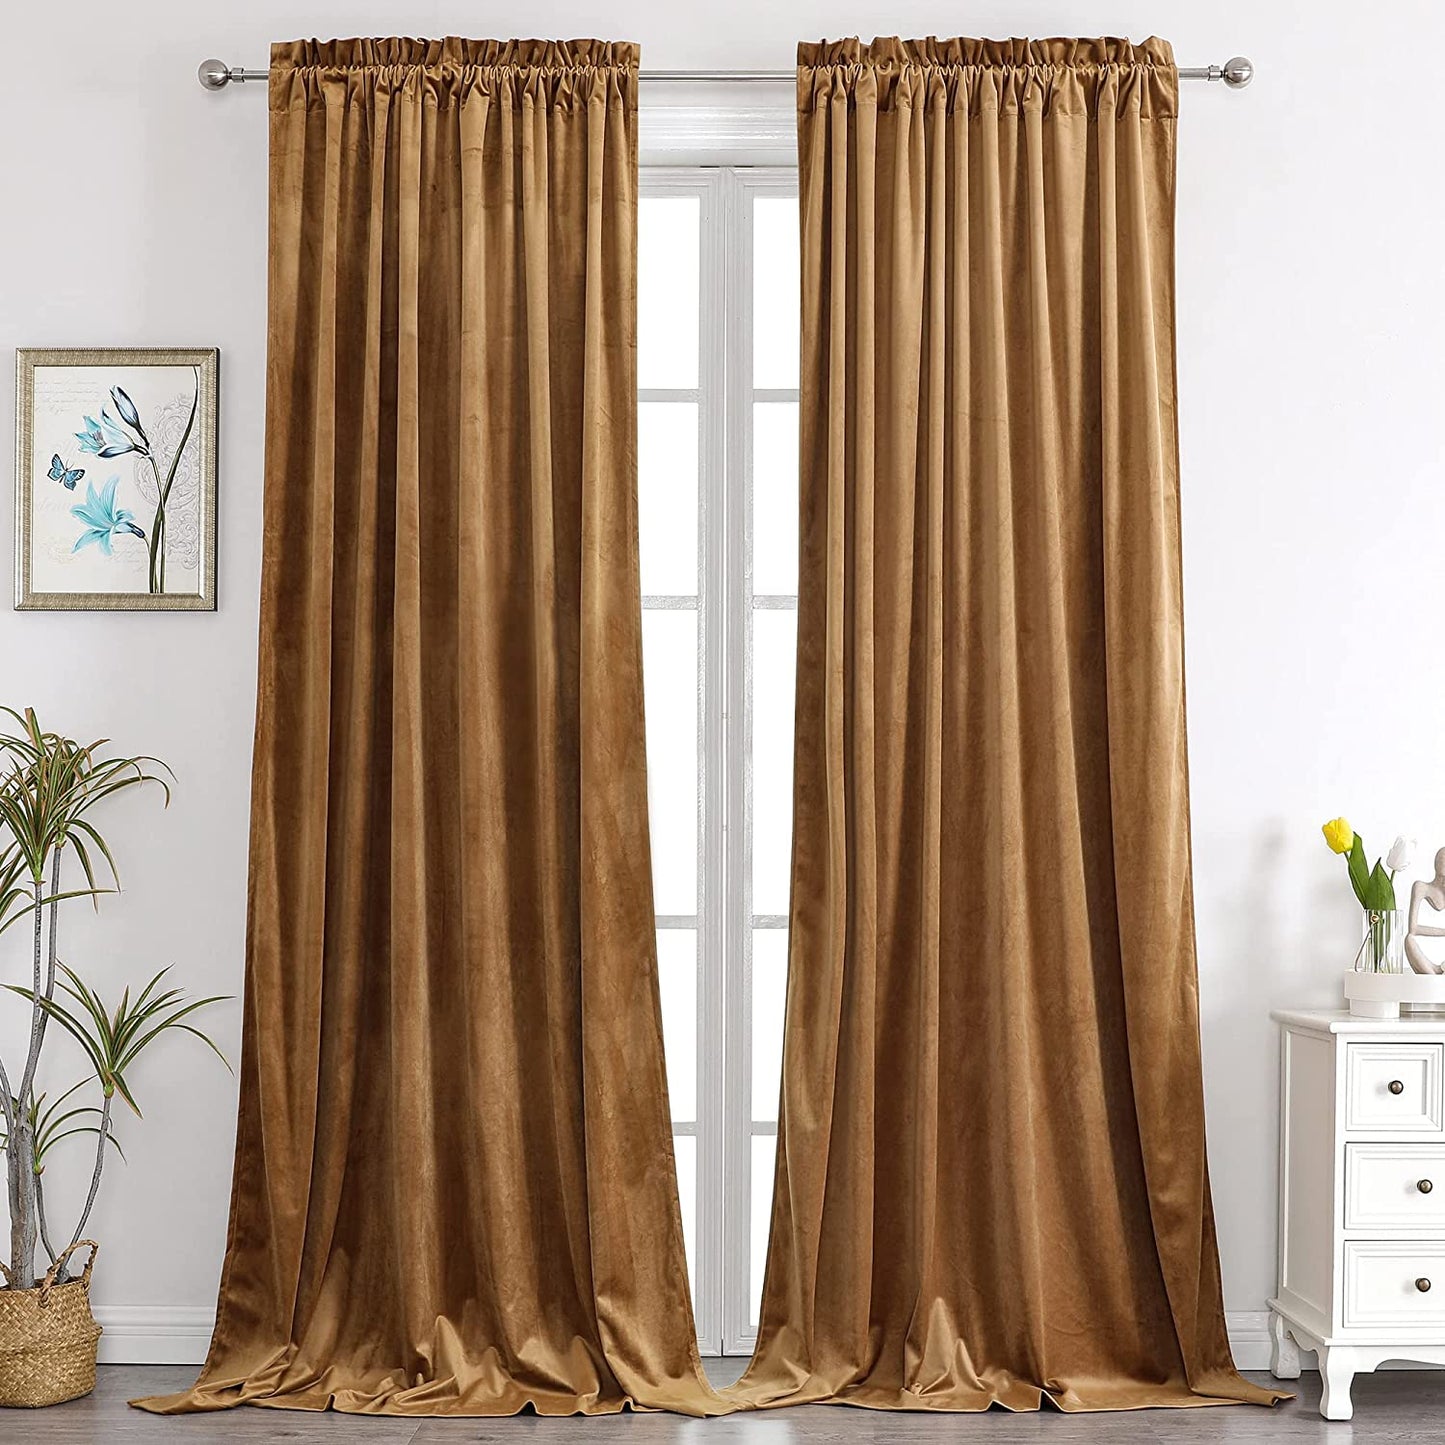 Benedeco Green Velvet Curtains for Bedroom Window, Super Soft Luxury Drapes, Room Darkening Thermal Insulated Rod Pocket Curtain for Living Room, W52 by L84 Inches, 2 Panels  Benedeco Camel W52 * L63 | 2 Panels 